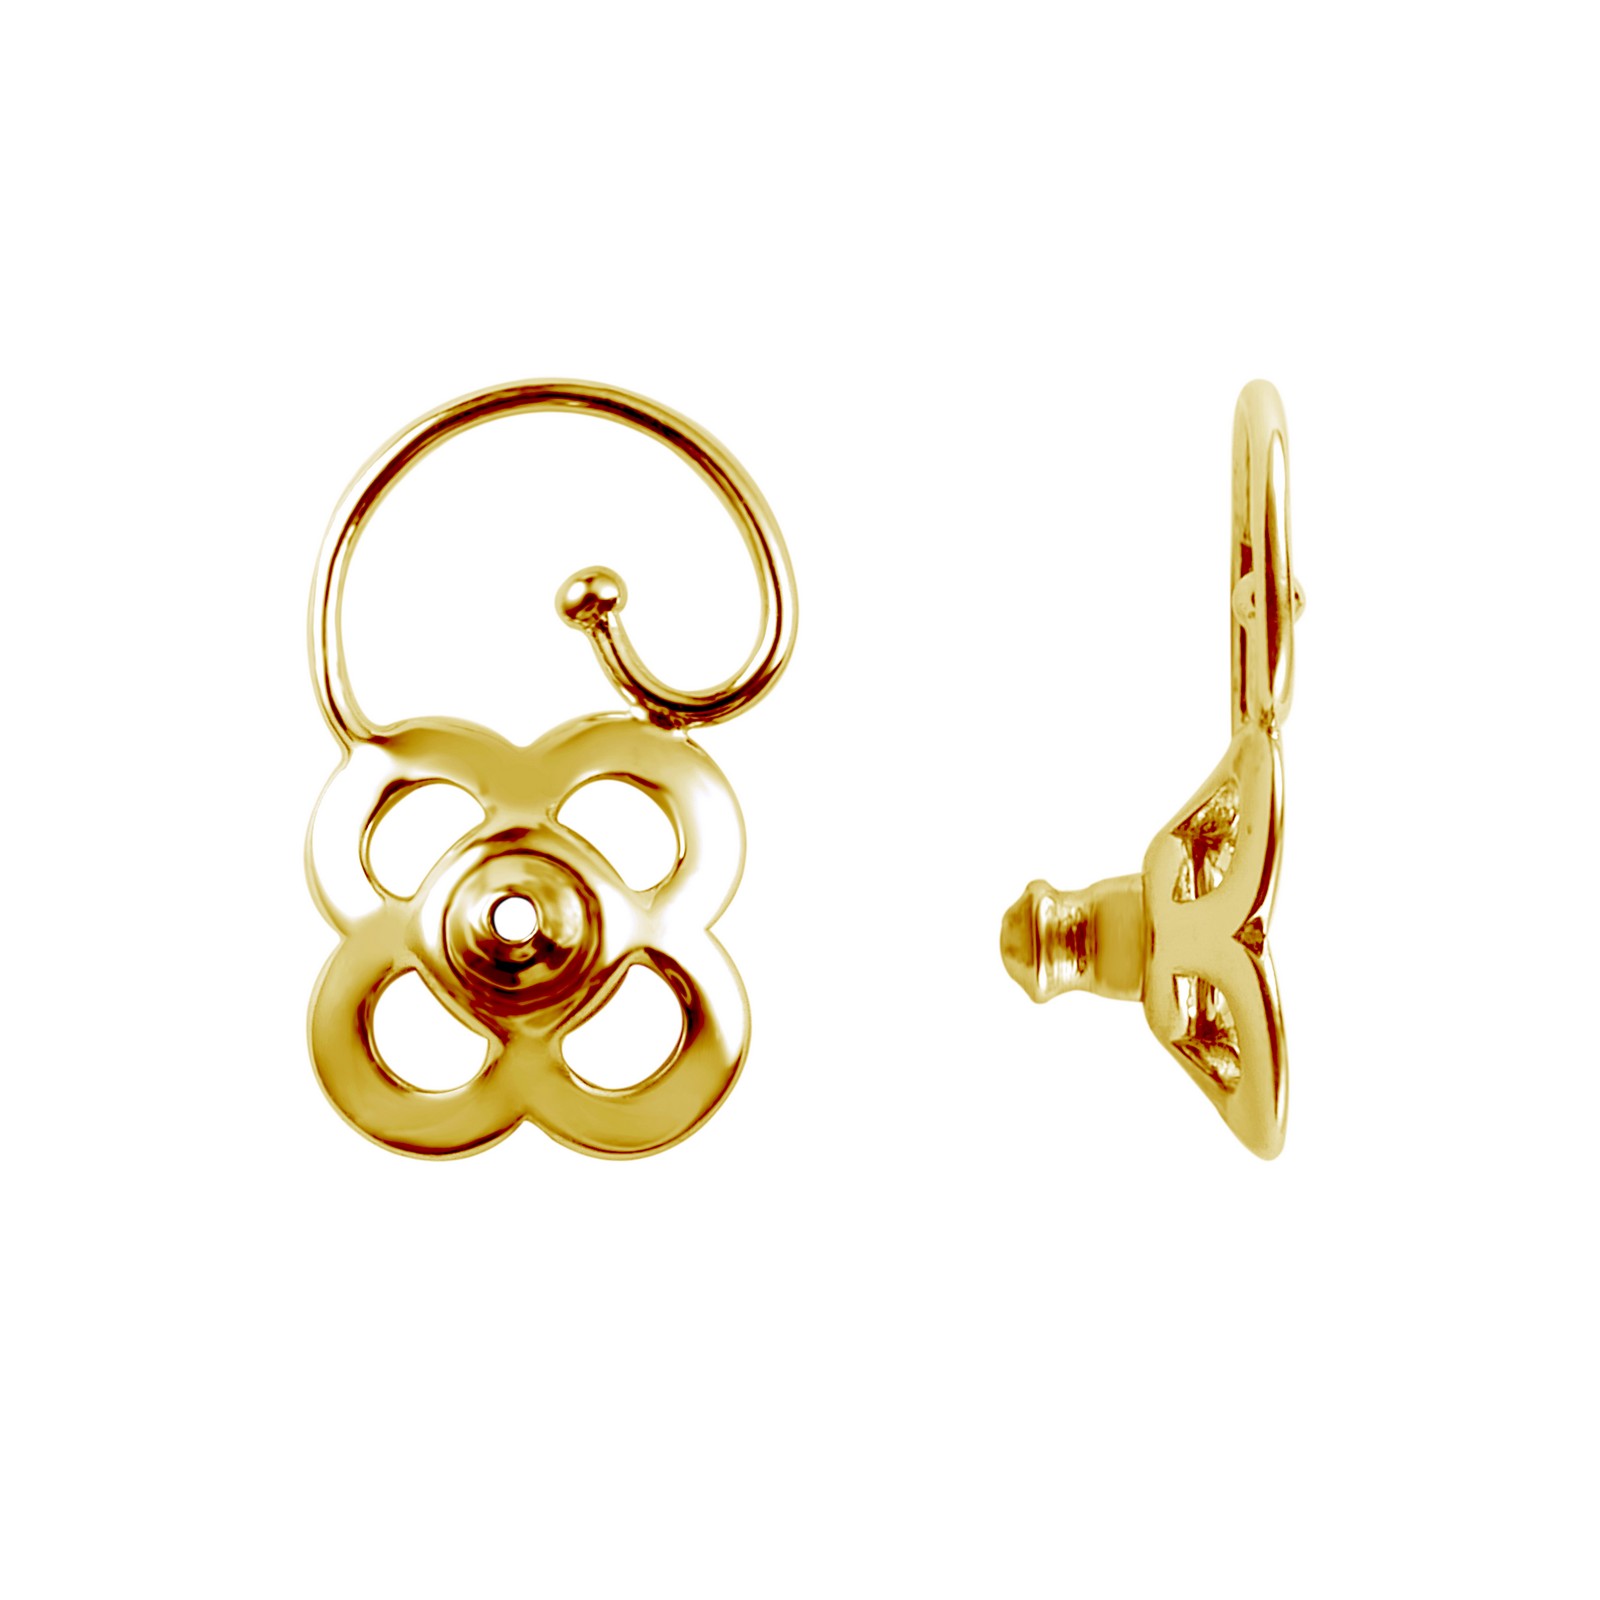 Lux-Clover Earring Backing Charles Frederick Jewelers Chelmsford, MA